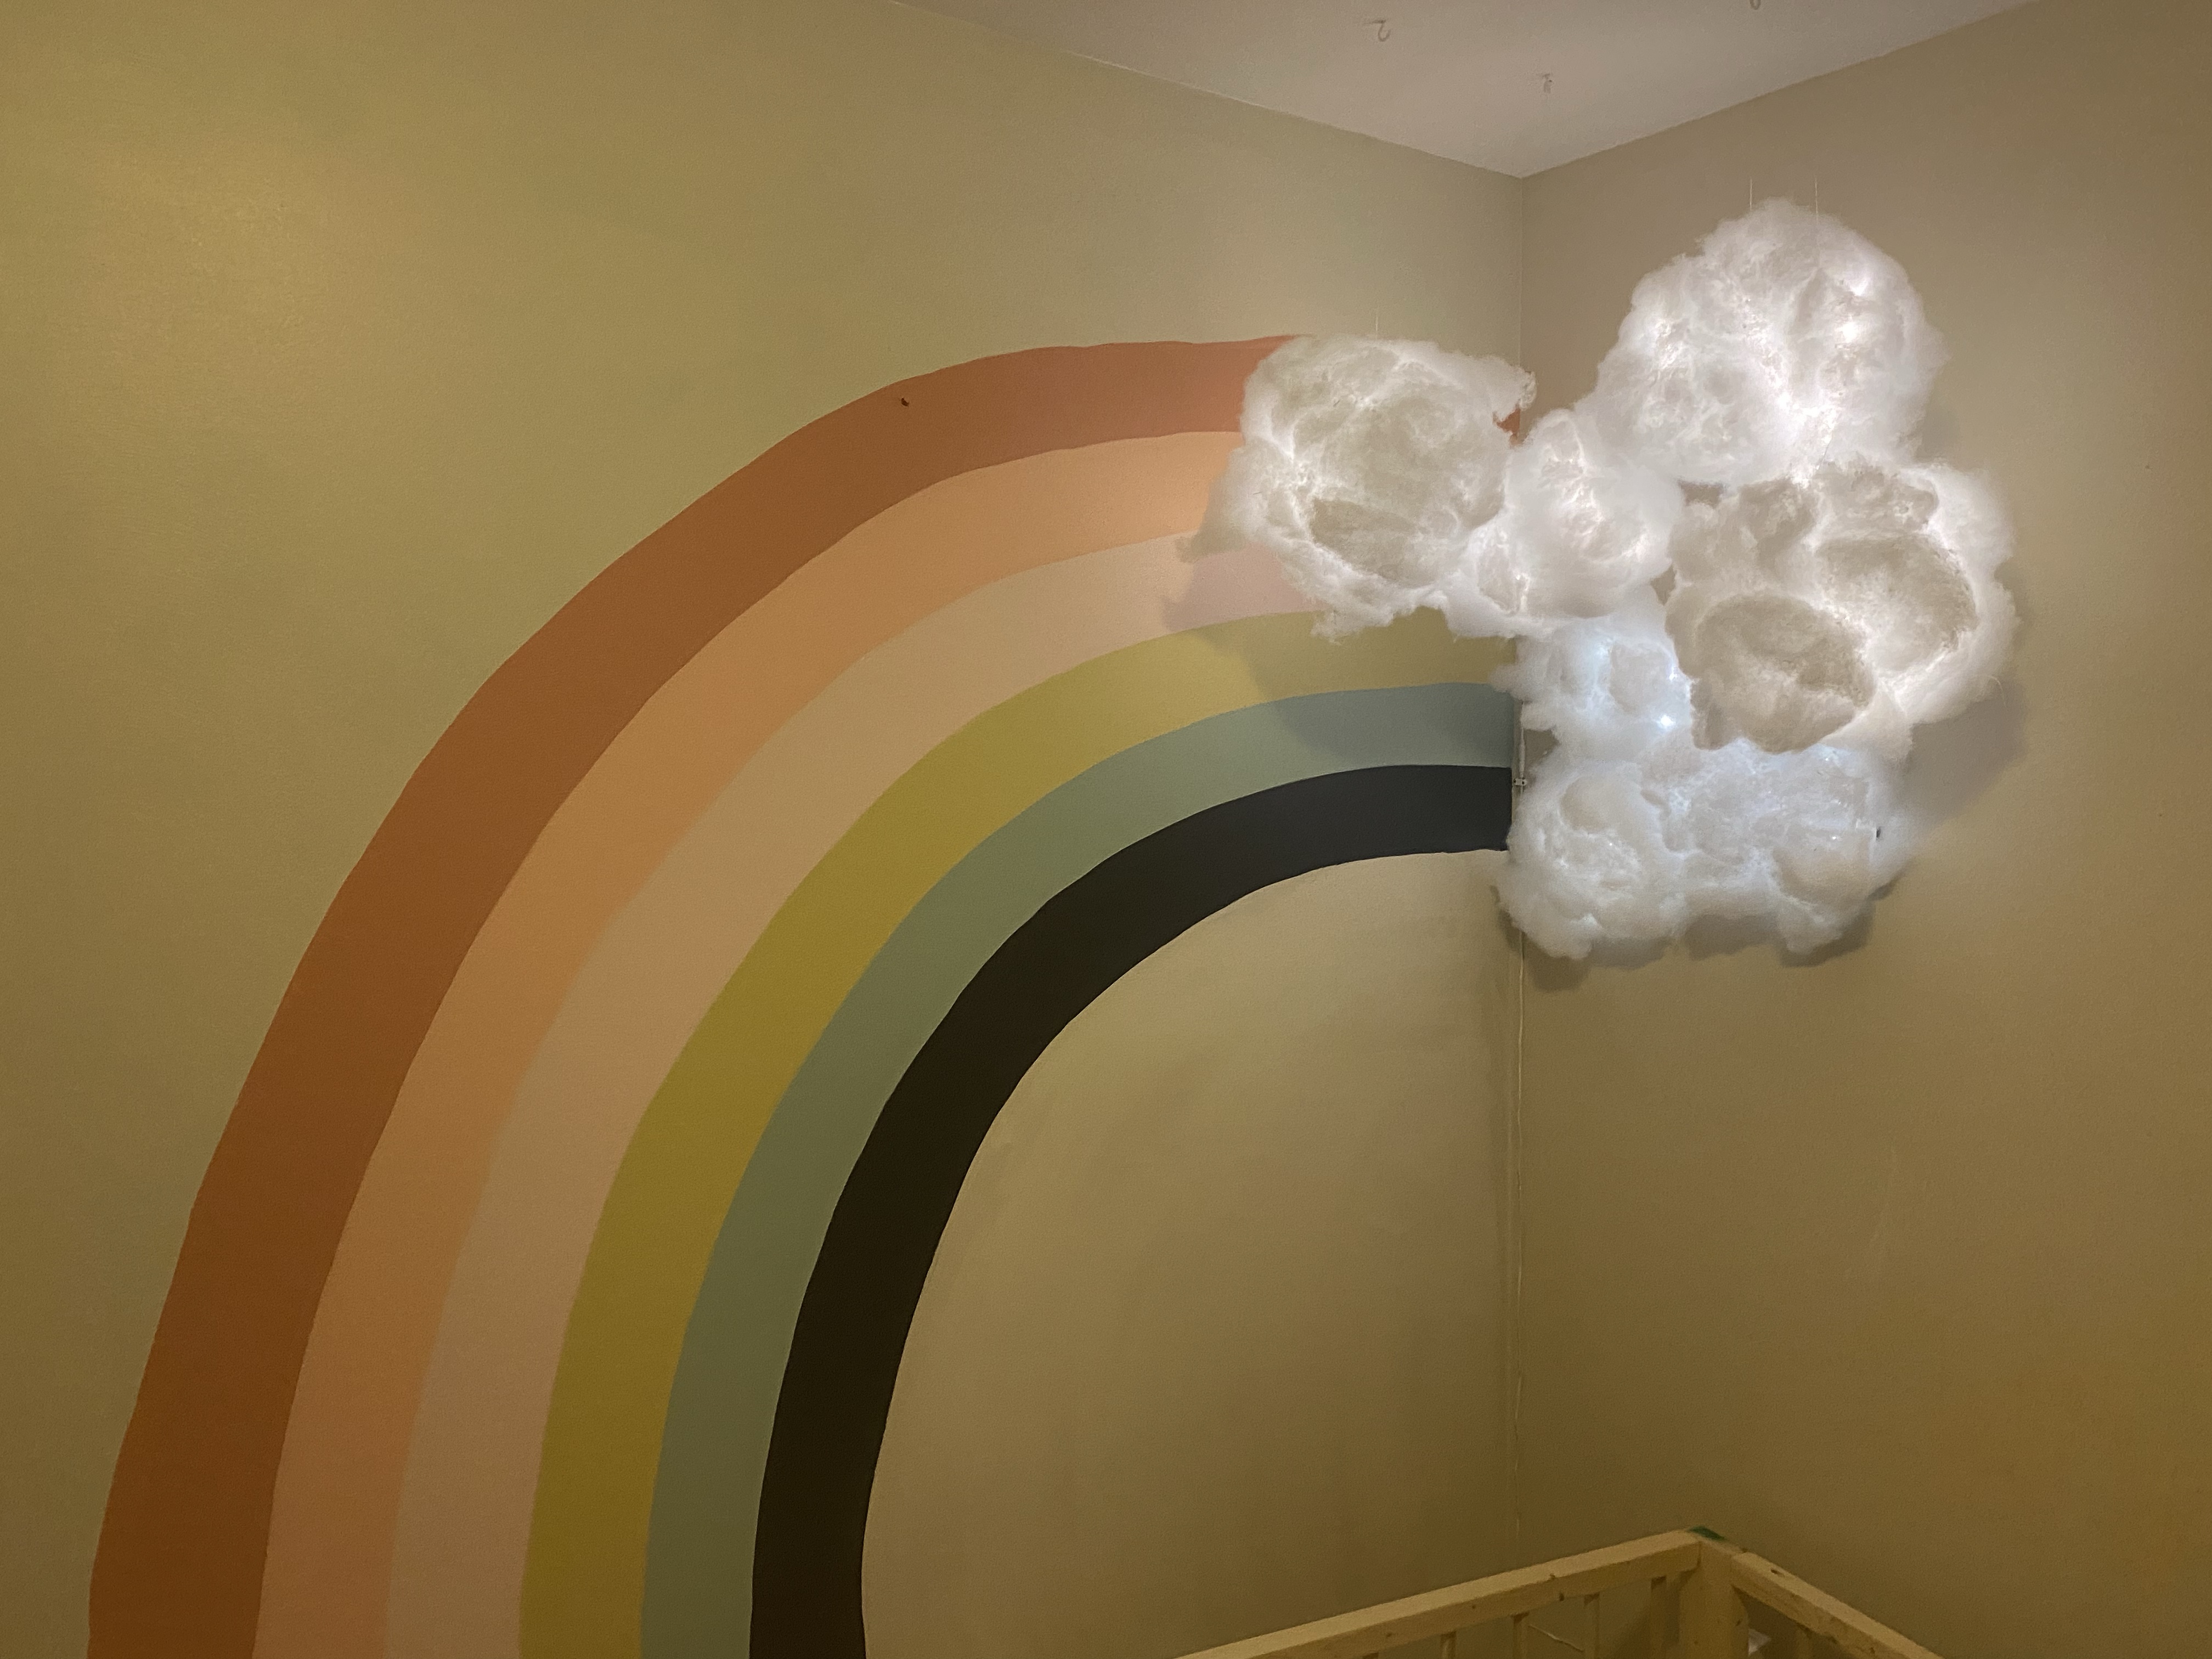 LED Cloud light at the end of the rainbow